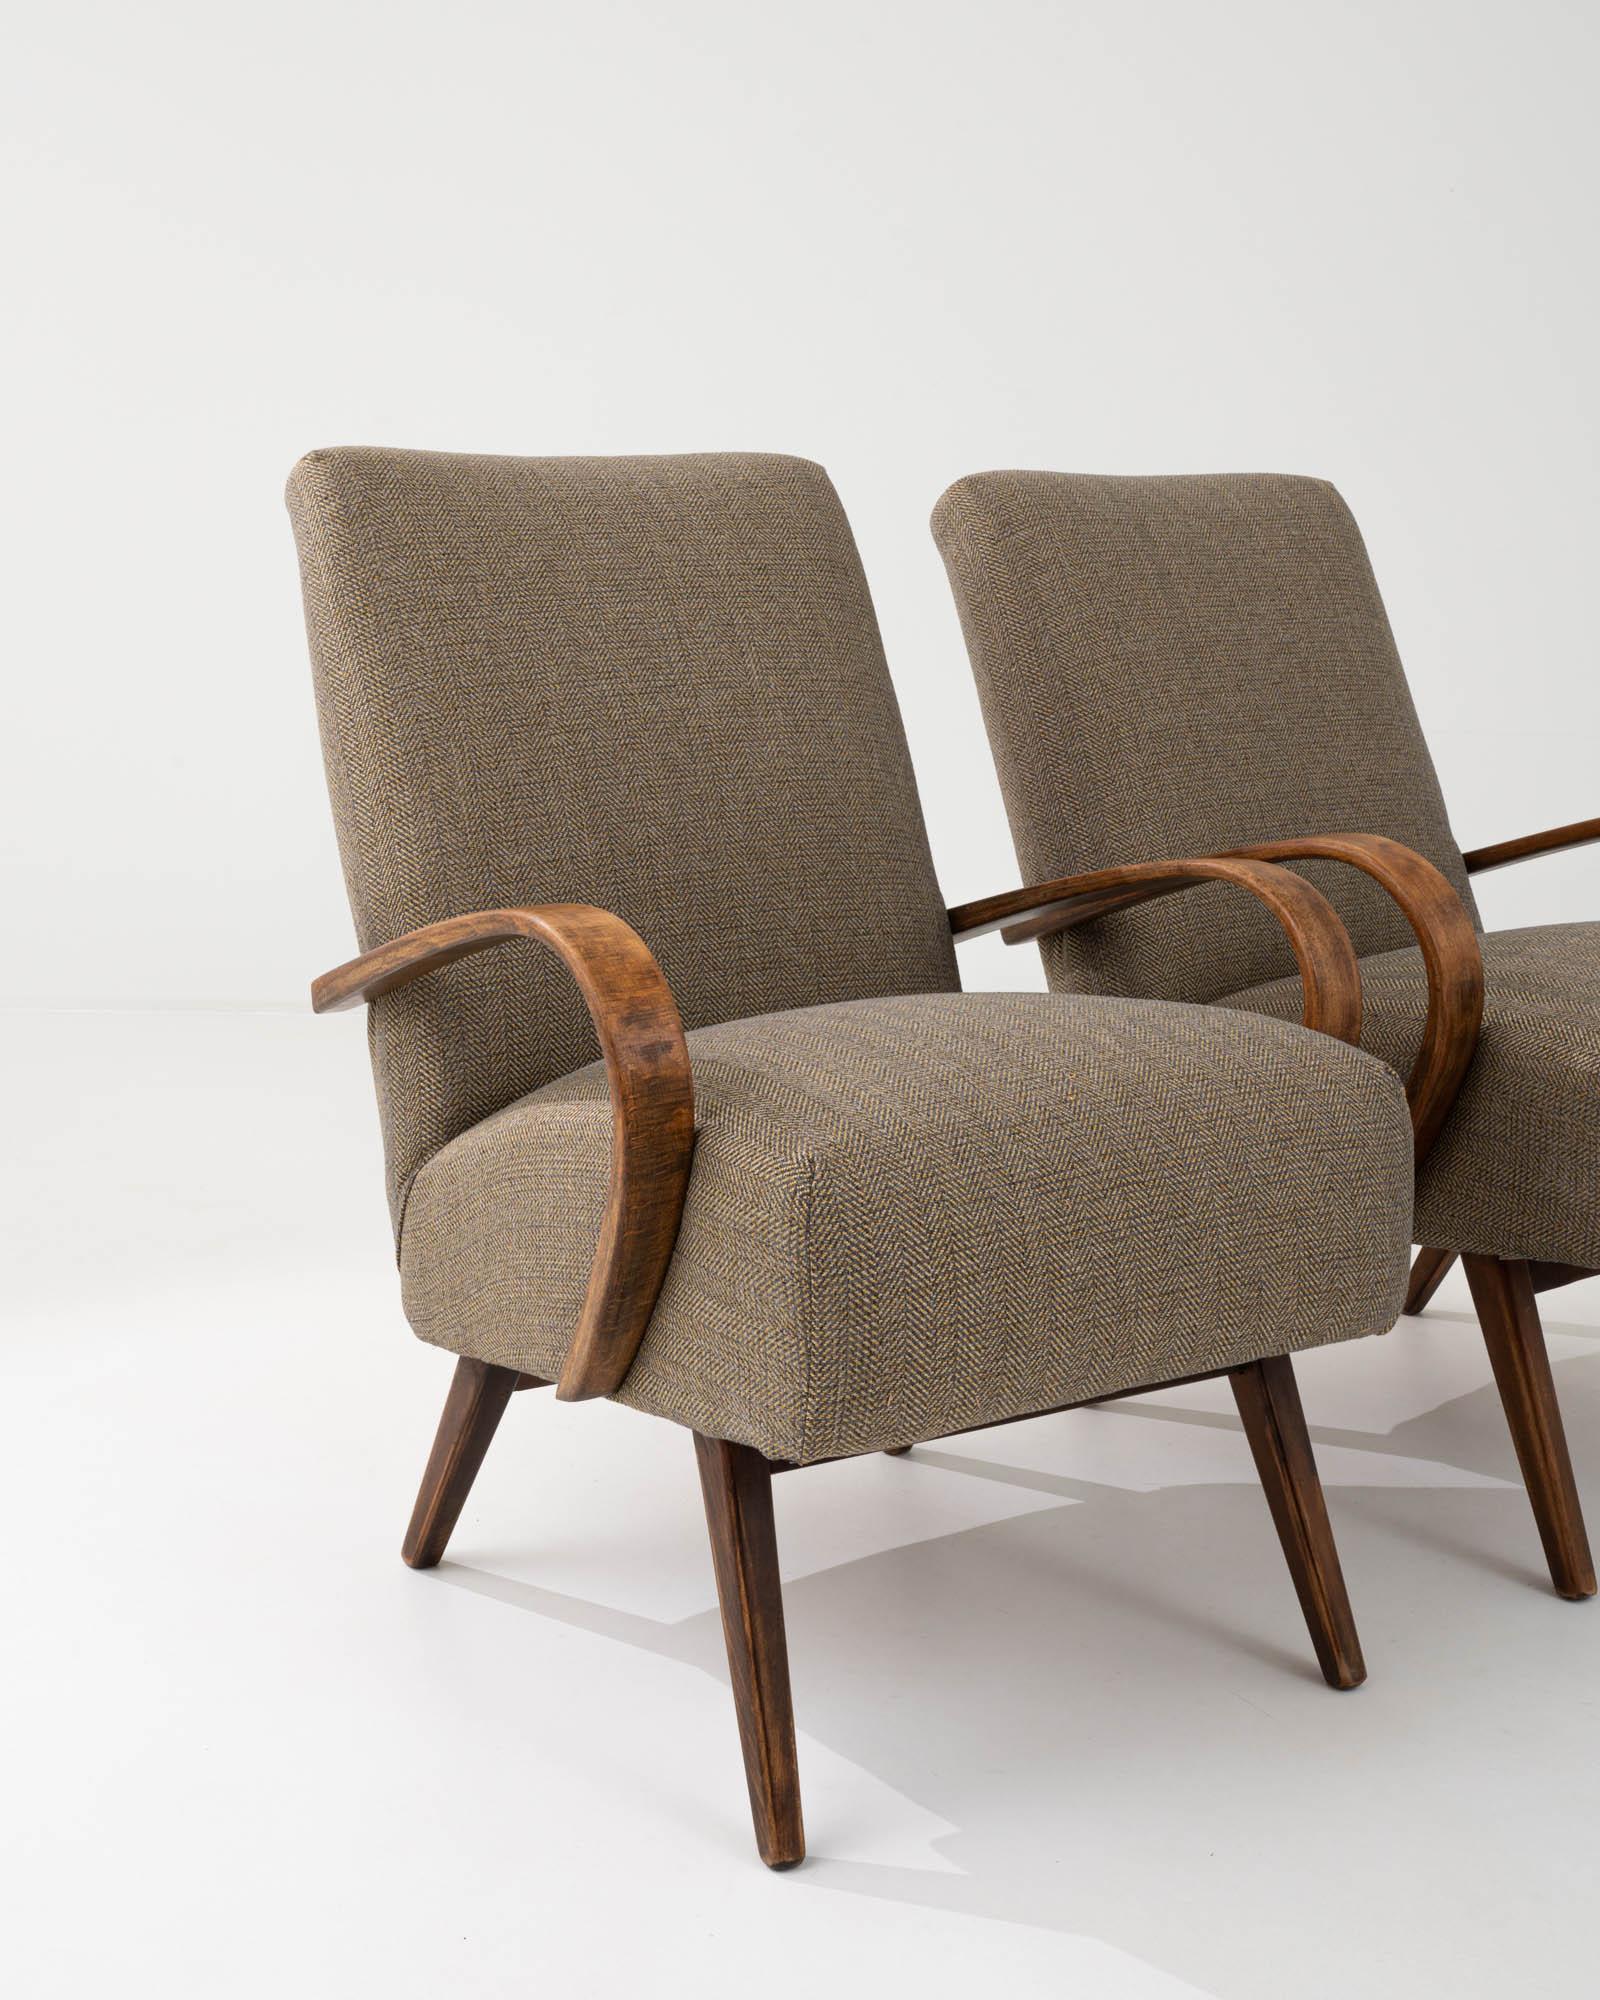 1950s Czech Beige Upholstered Armchairs, a Pair For Sale 4